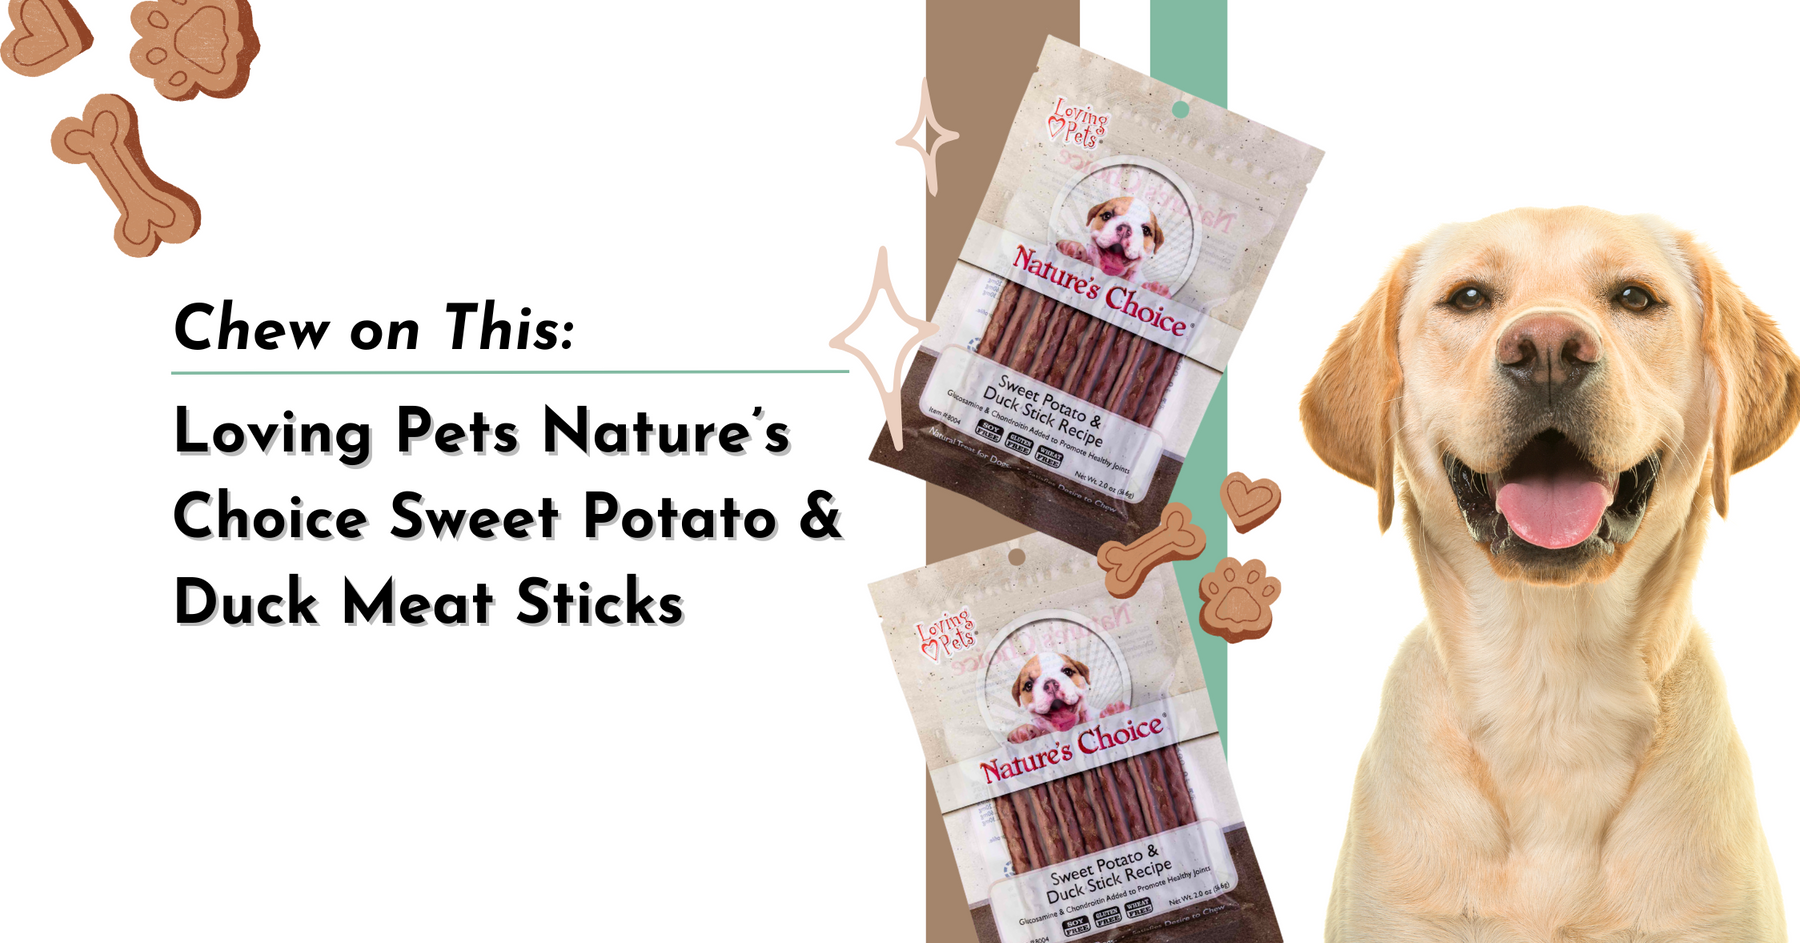 Chew on This: Loving Pets Nature’s Choice Sweet Potato & Duck Meat Sticks